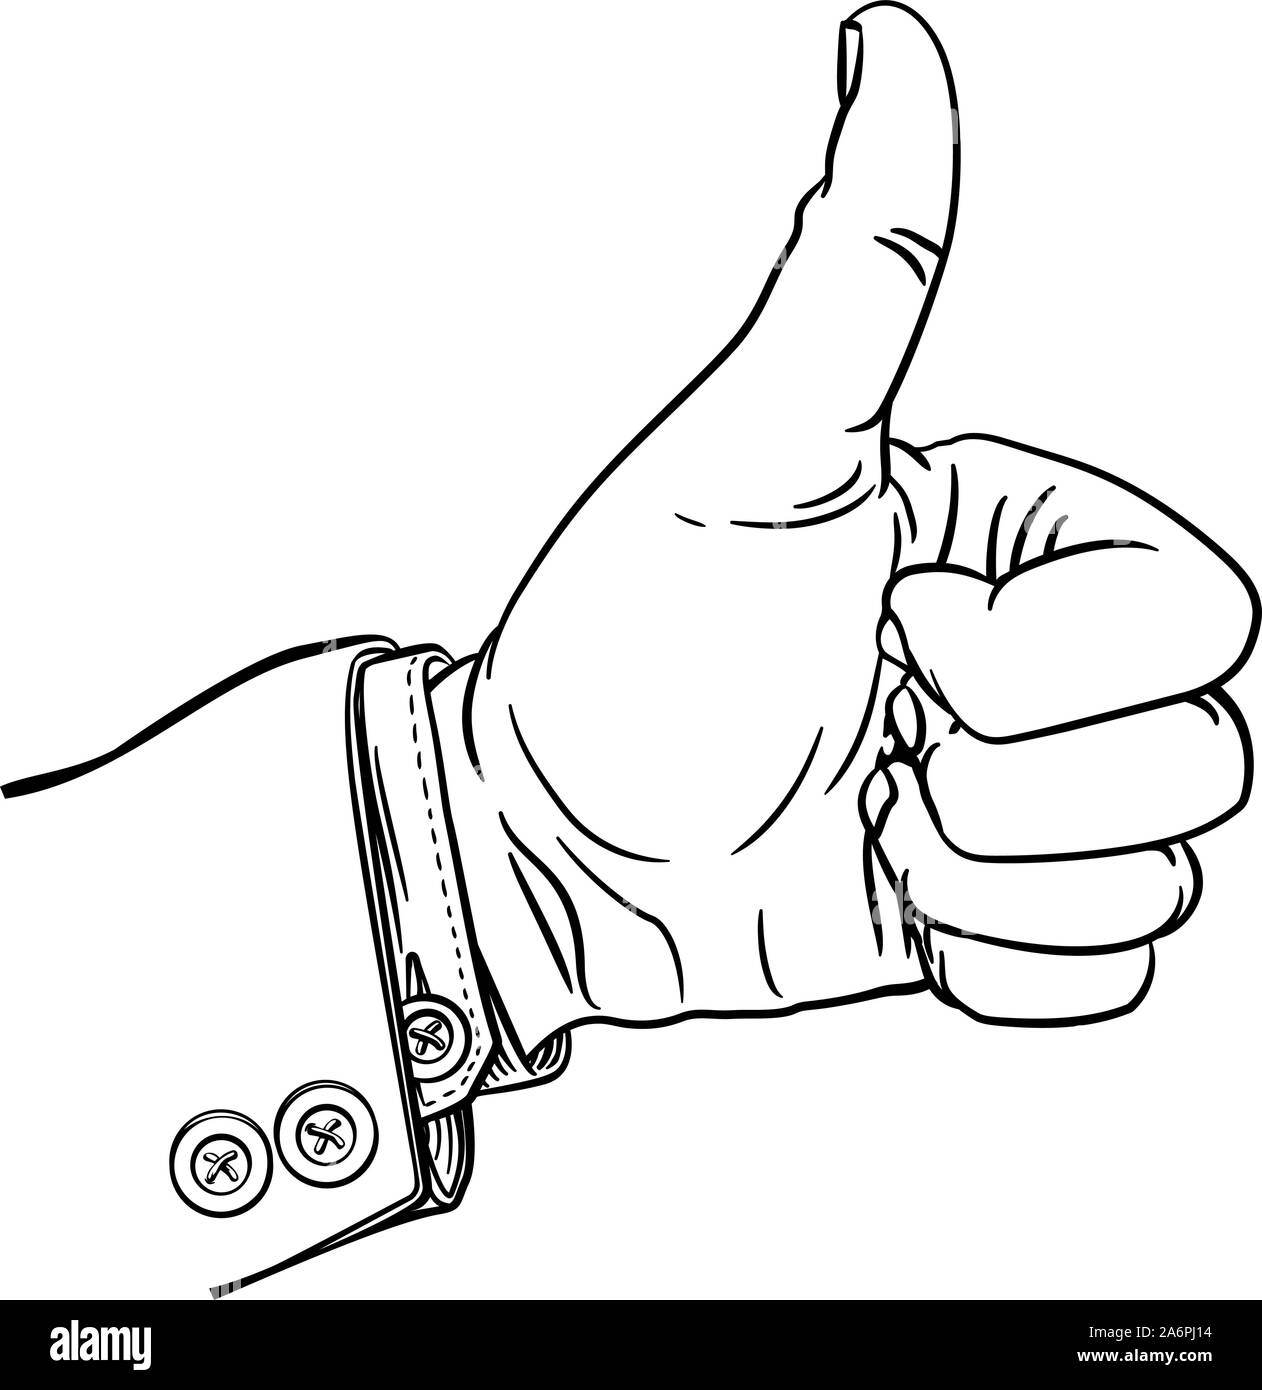 Hand Thumbs Up Gesture Thumb Out Fingers In Fist Stock Vector